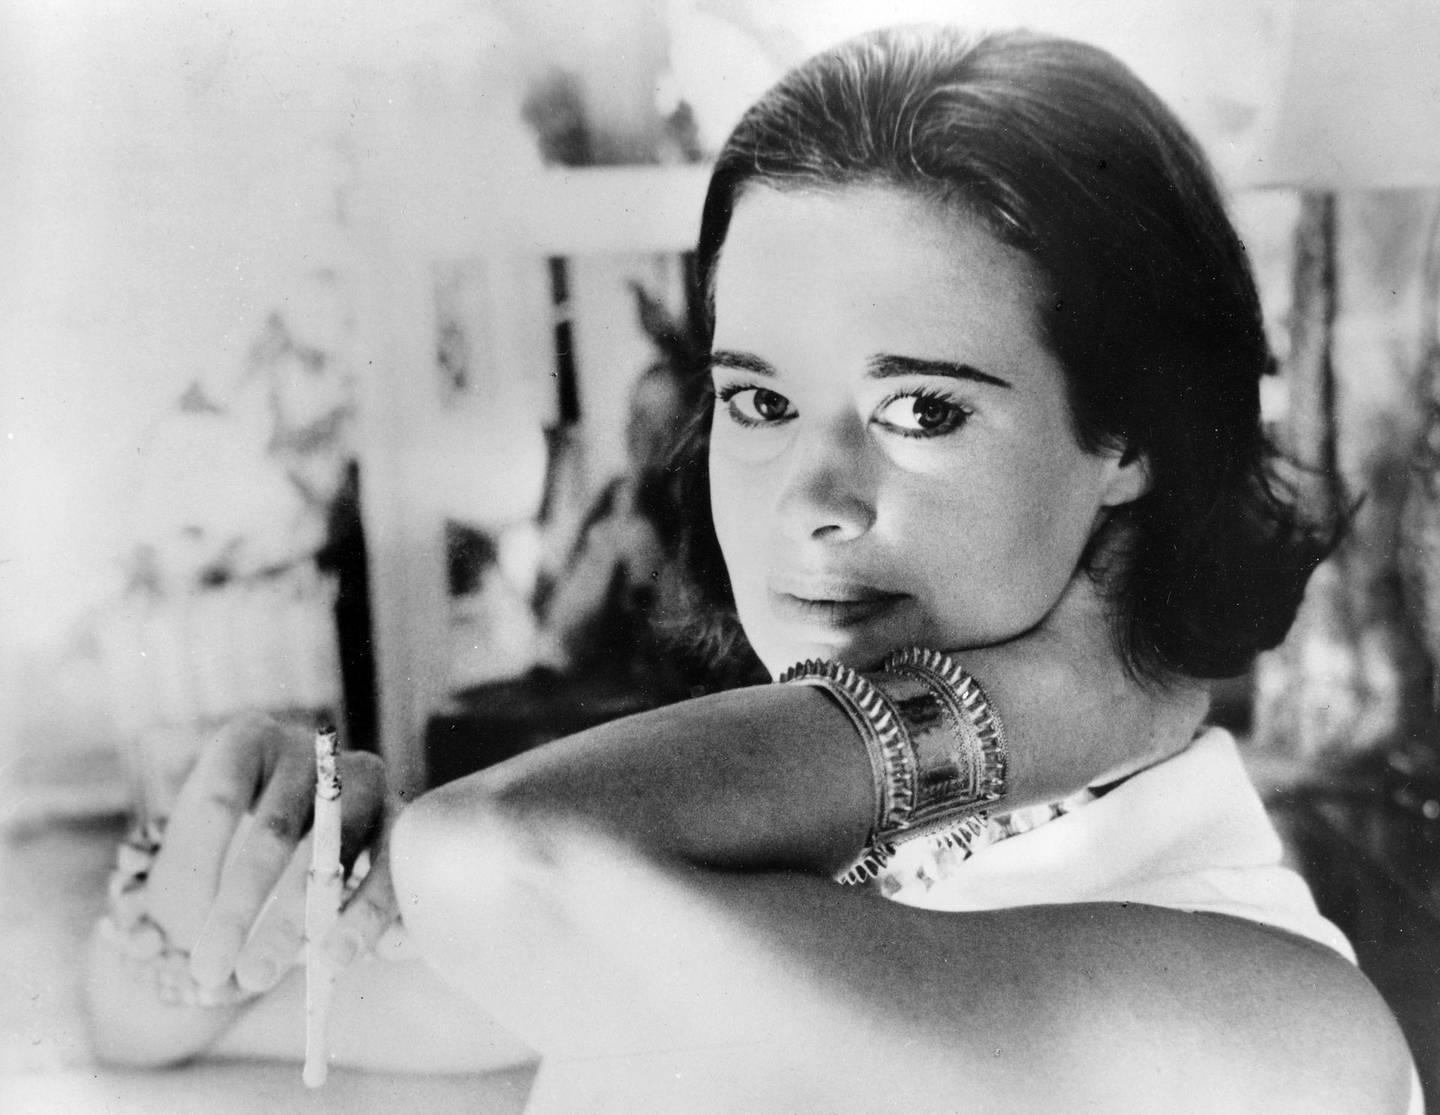 FILE - In this Jan. 4, 1964 file photo, railroad heiress Gloria Vanderbilt poses for a photograph. Vanderbilt, the intrepid heiress, artist and romantic who began her extraordinary life as the "poor little rich girl" of the Great Depression, survived family tragedy and multiple marriages and reigned during the 1970s and '80s as a designer jeans pioneer, died Monday, June 17, 2019,  at the age of 95.  (AP Photo, File)